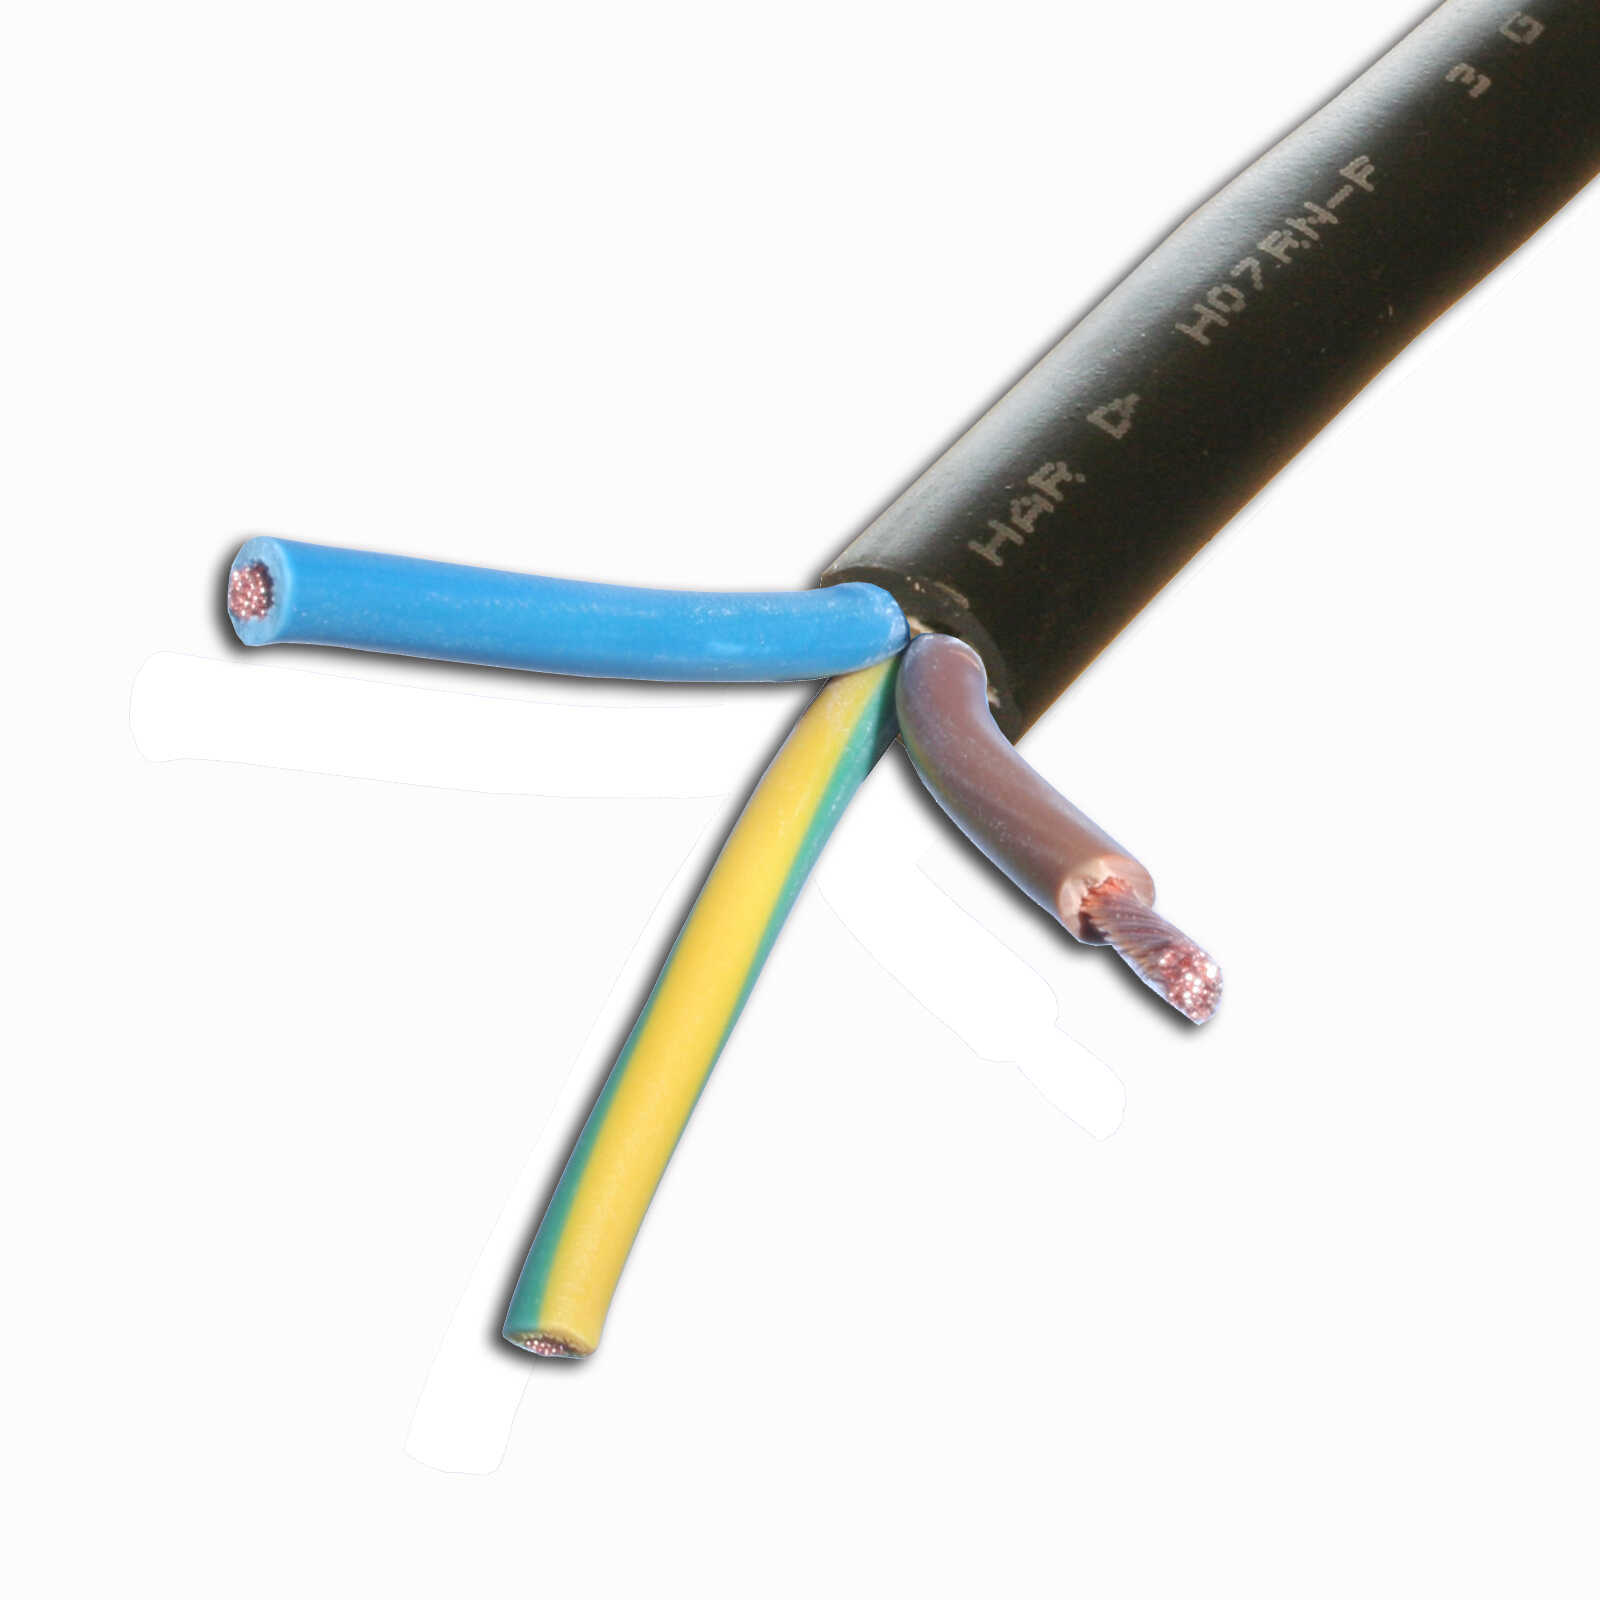 h07_mains_cable_5.jpg